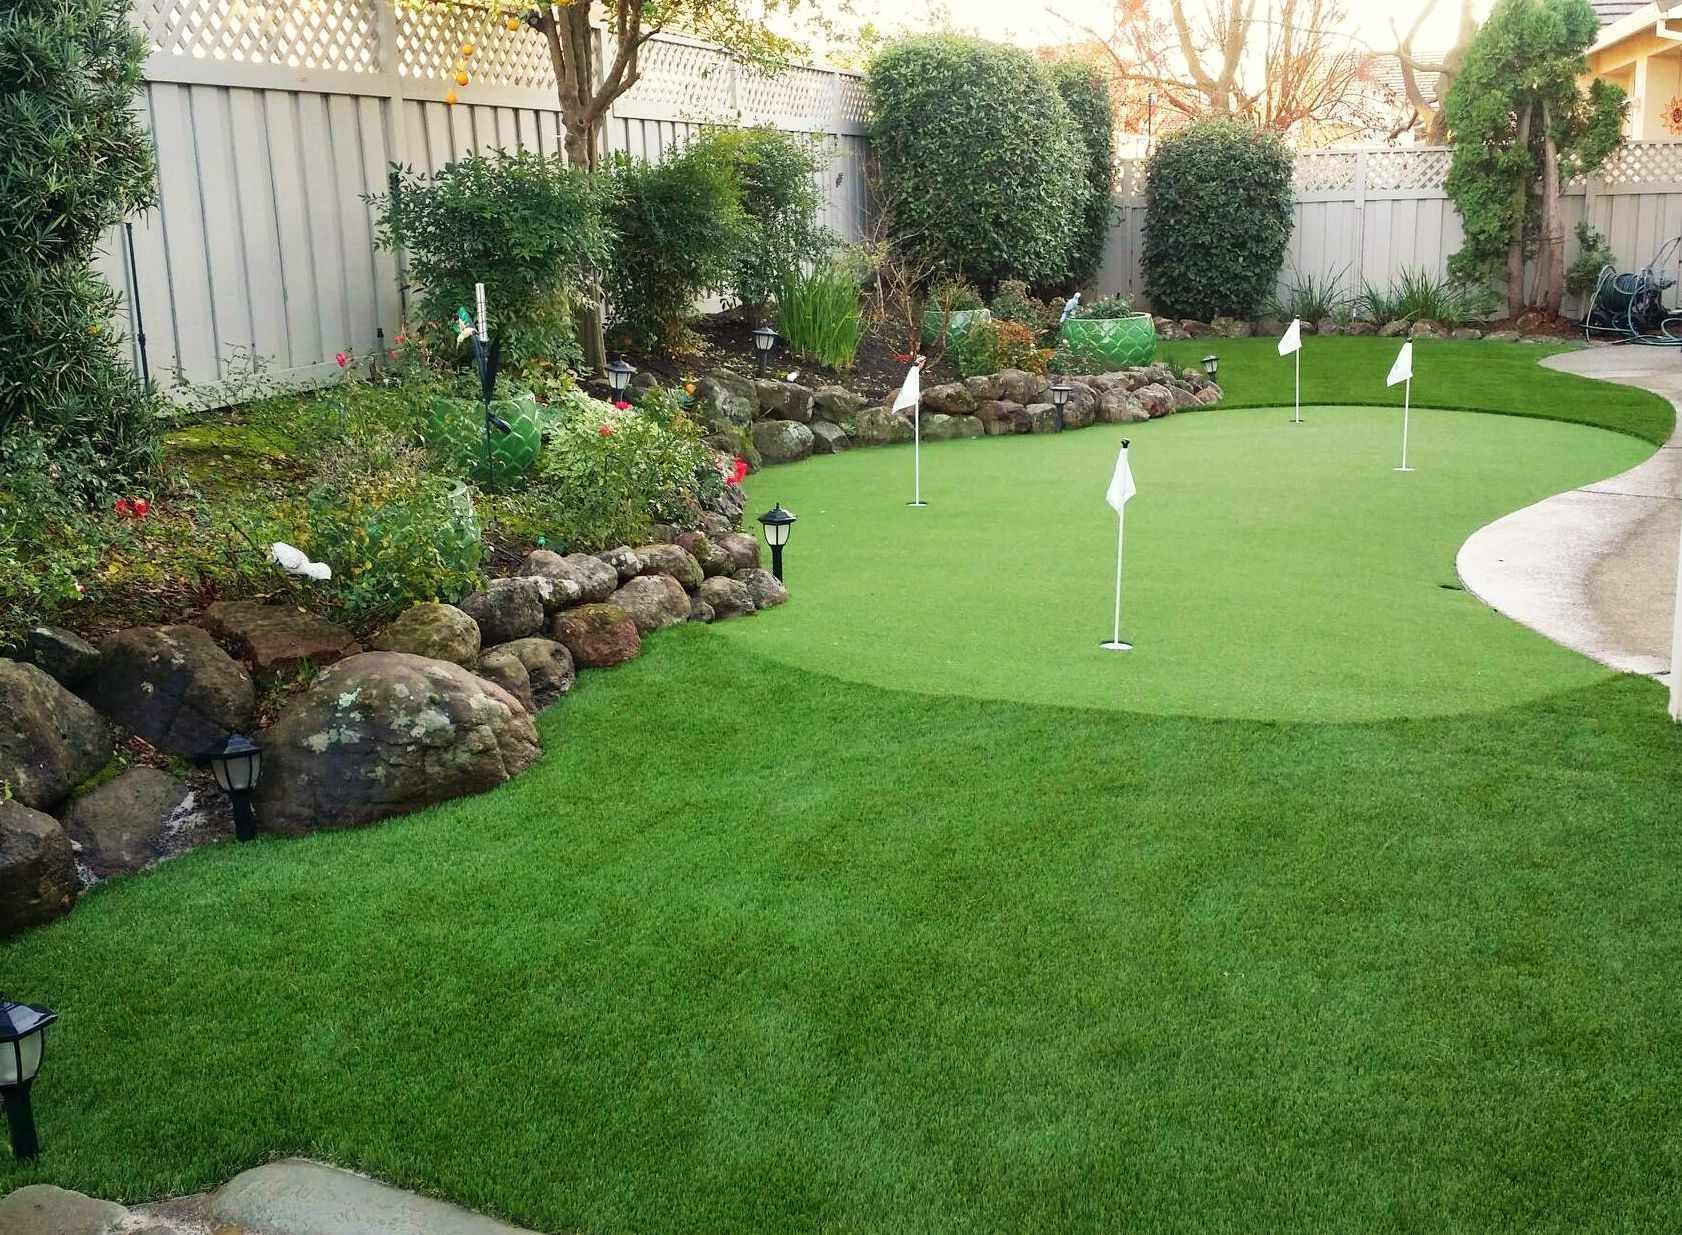 How To Practice Golf In The Backyard